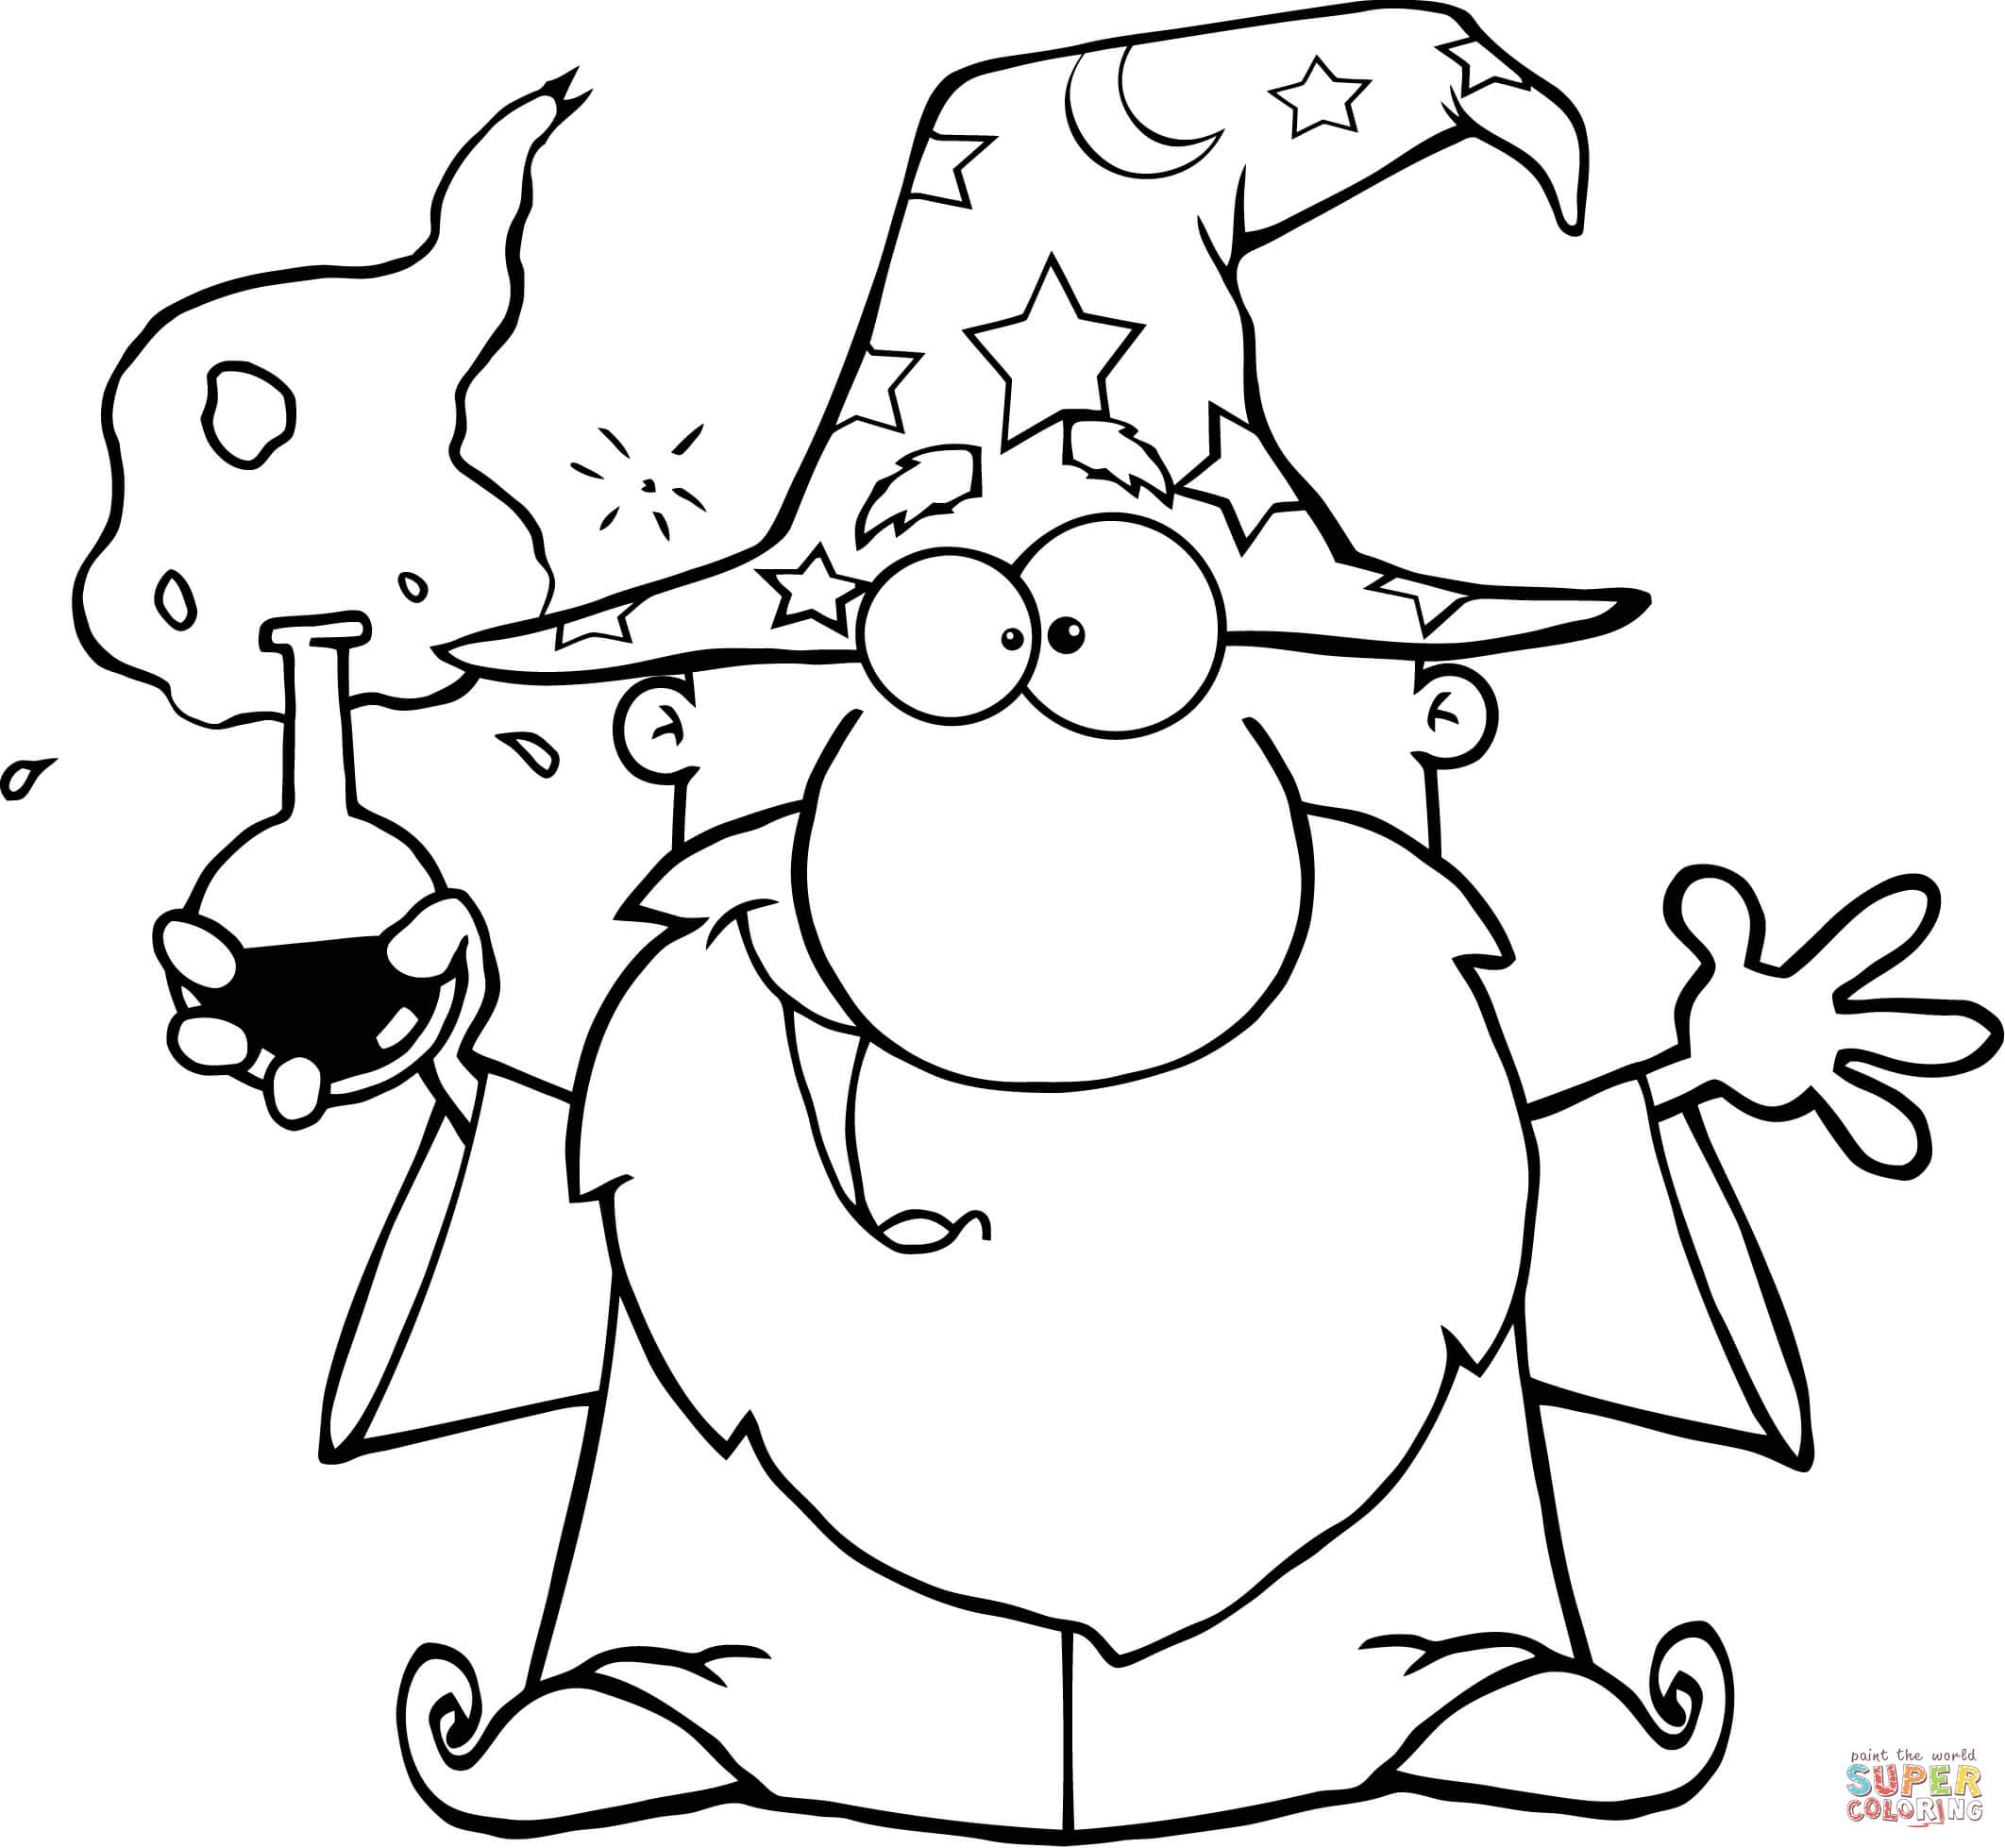 Crazy Wizard Holding a Green Magic Potion coloring page | Free Printable Coloring  Pages